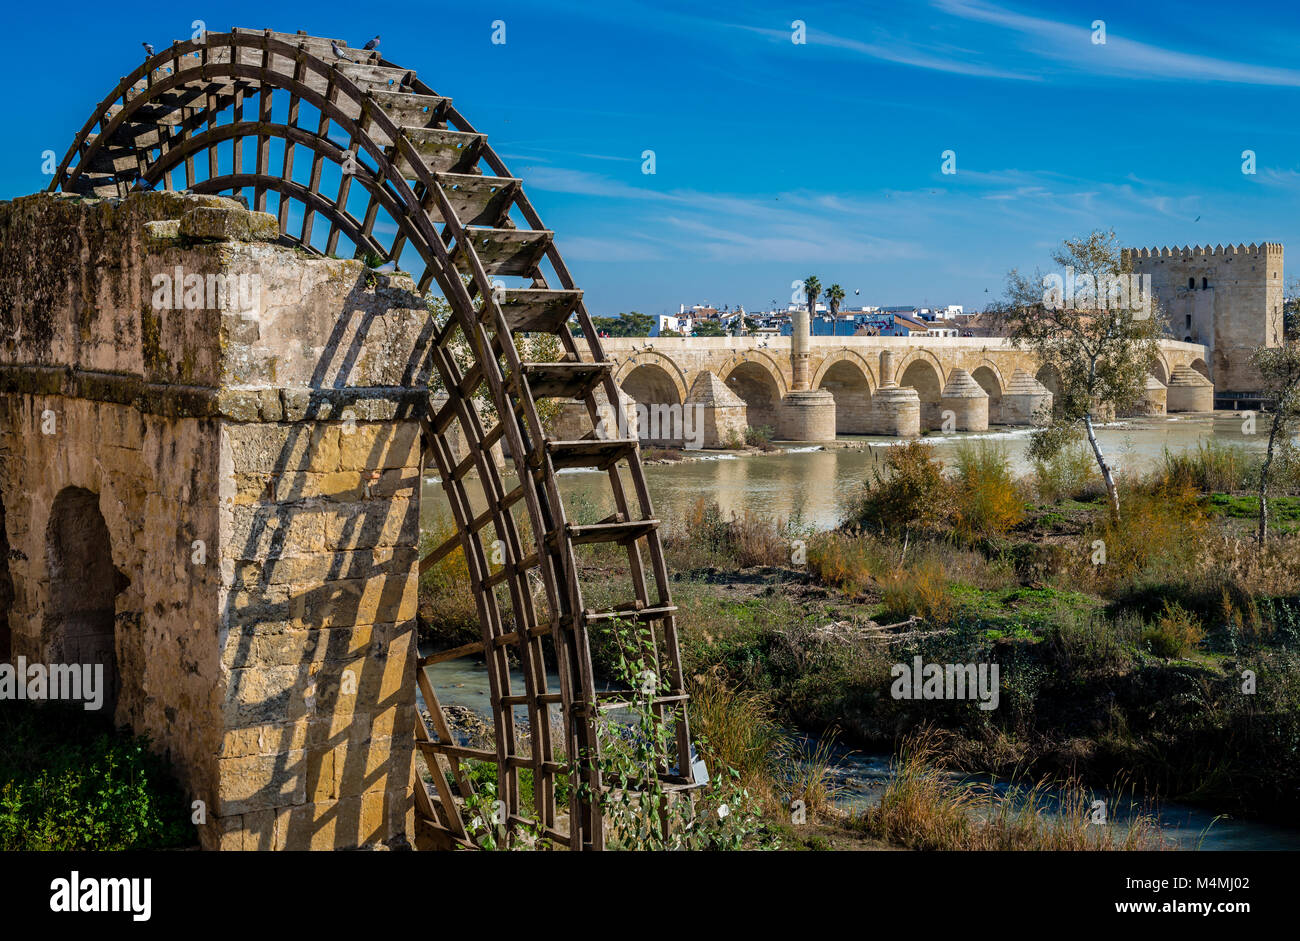 The Roman bridge and the the medieval mill on the banks of the river Guadaquivir in Cordoba, Andalusia, Spain. Stock Photo